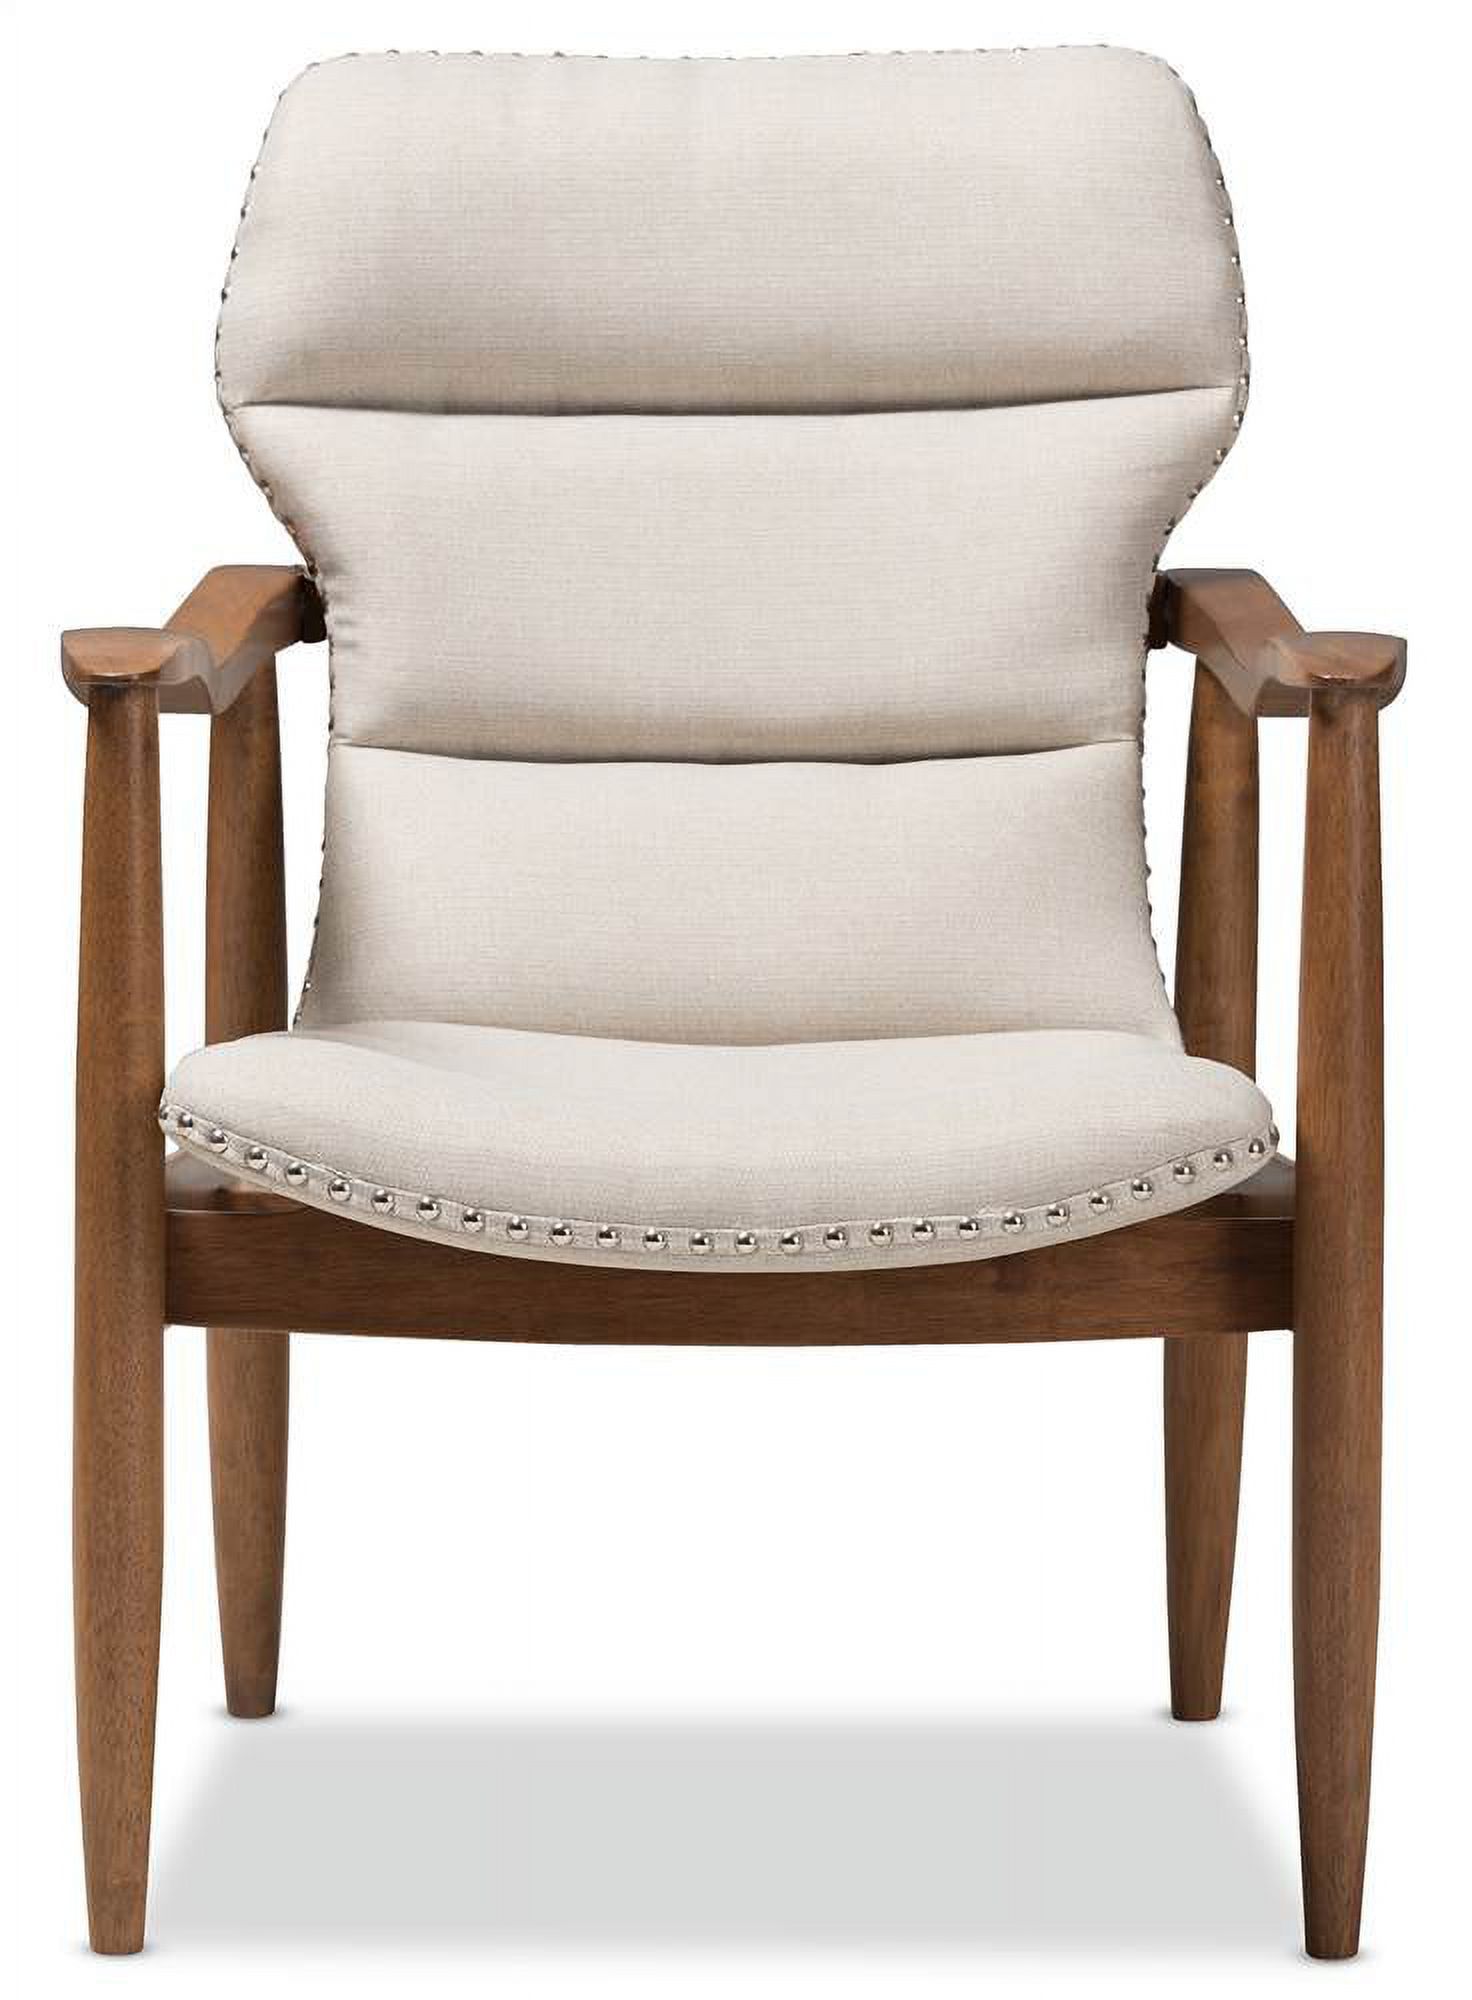 Mid-Century Modern Lounge Chair in Light Beige and Walnut Brown - image 2 of 6